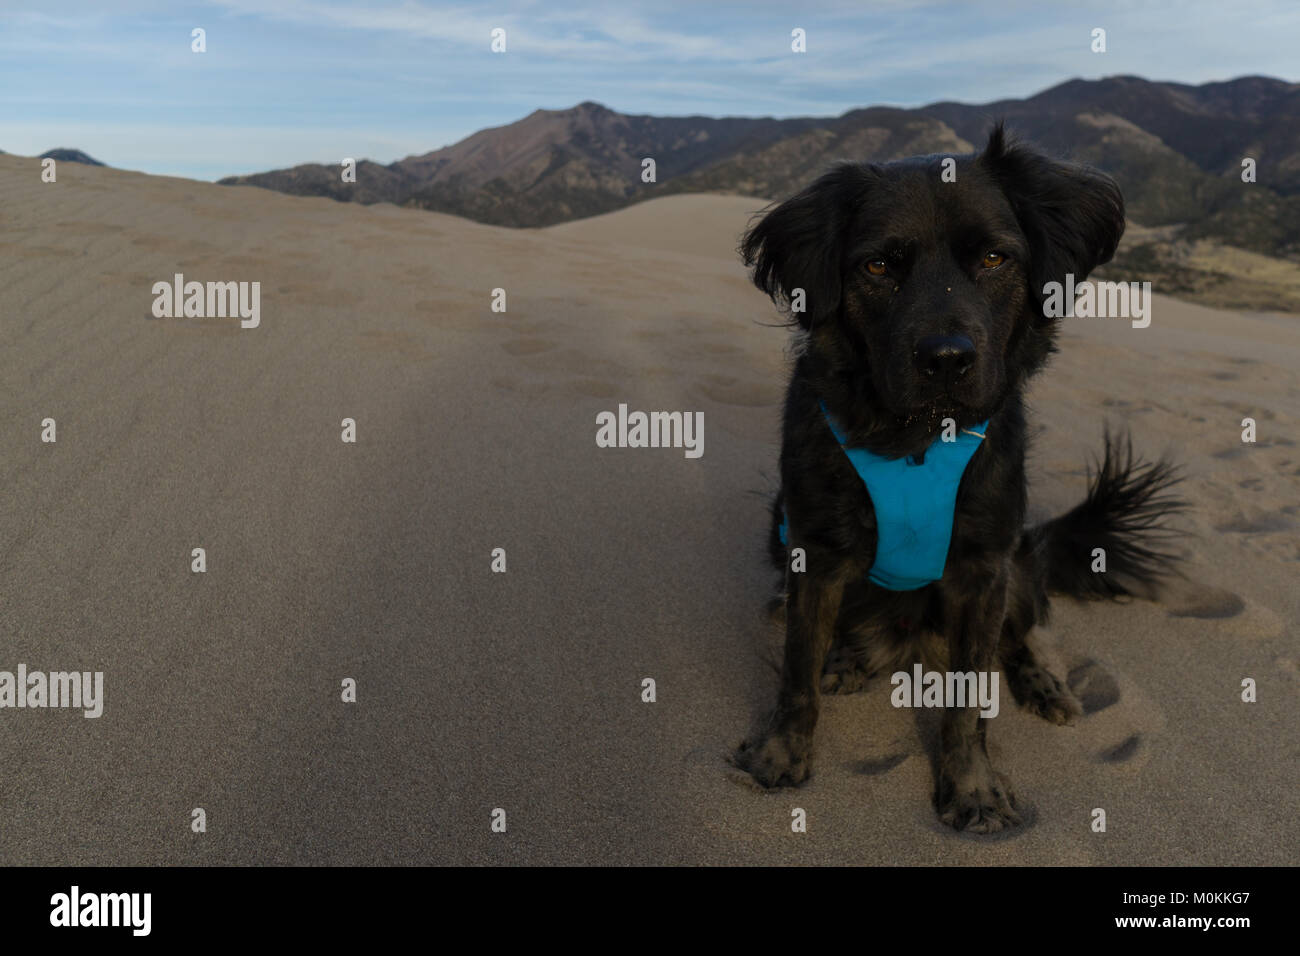 Dogs are allowed in the Great Sand Dunes National Park, in Colorado. Stock Photo